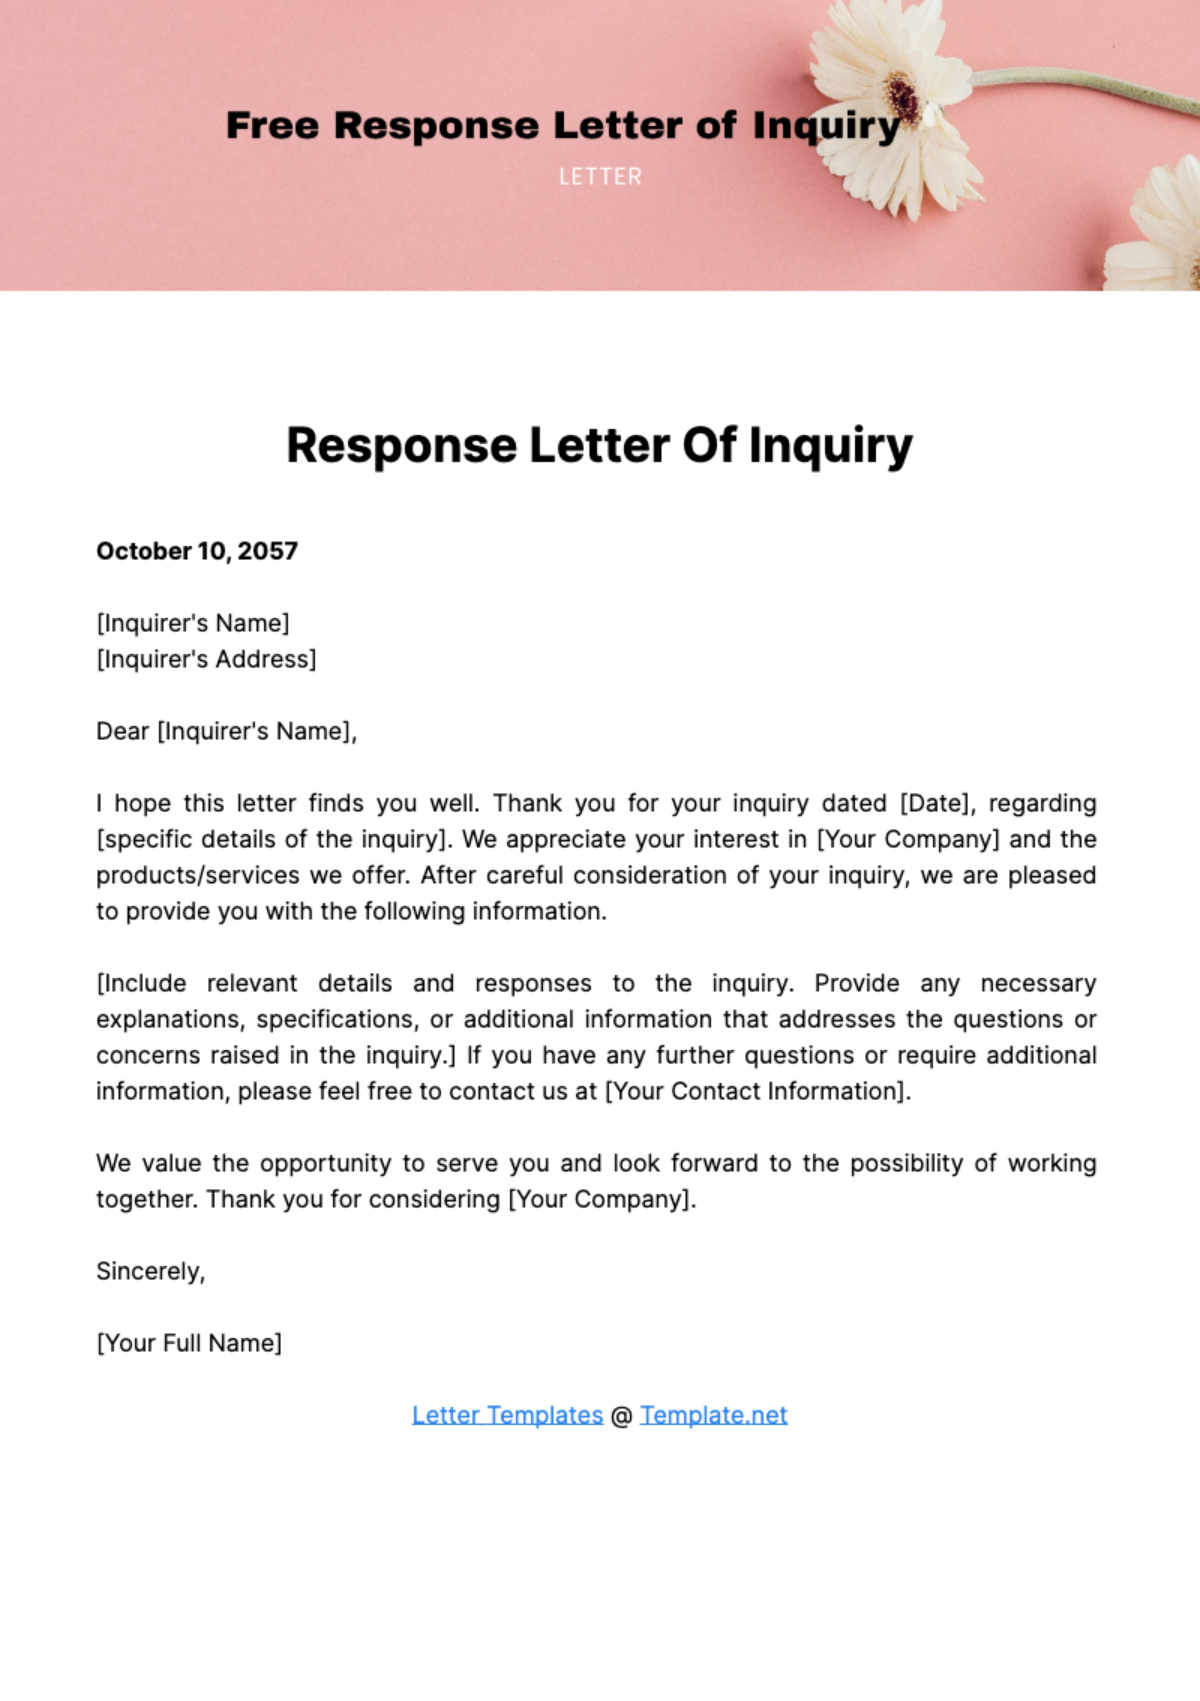 Response Letter of Inquiry Template